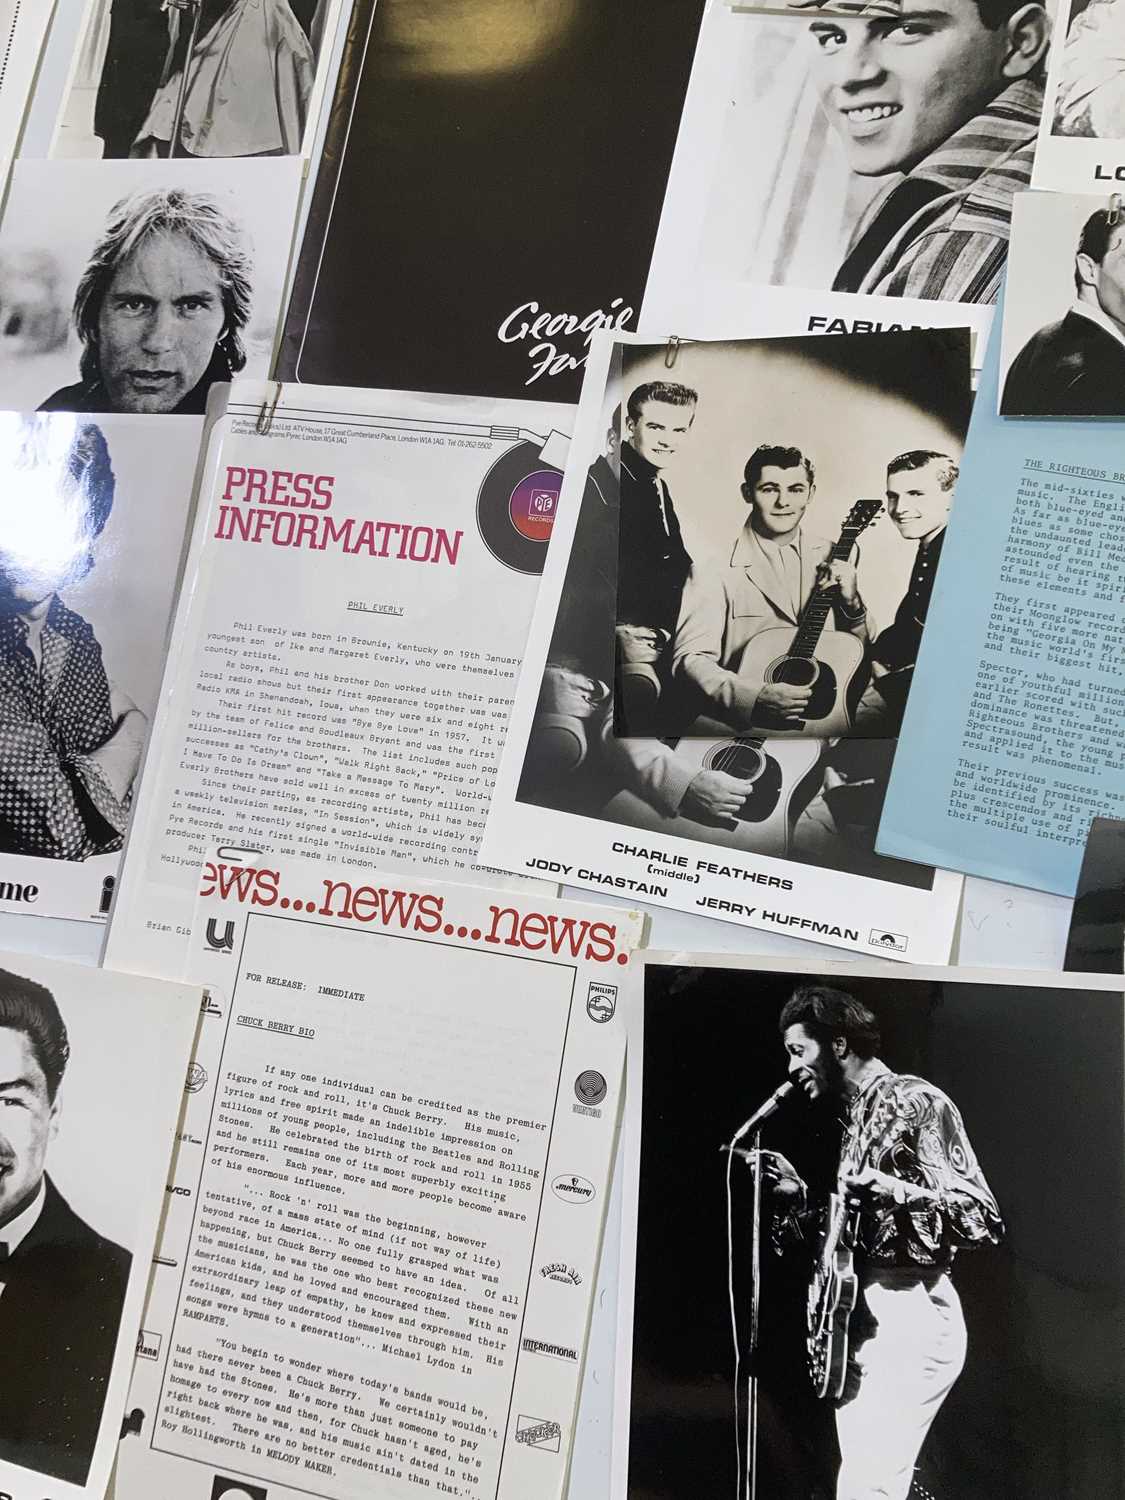 PRESS KIT ARCHIVE - ROCK N ROLL ARTISTS. - Image 3 of 5